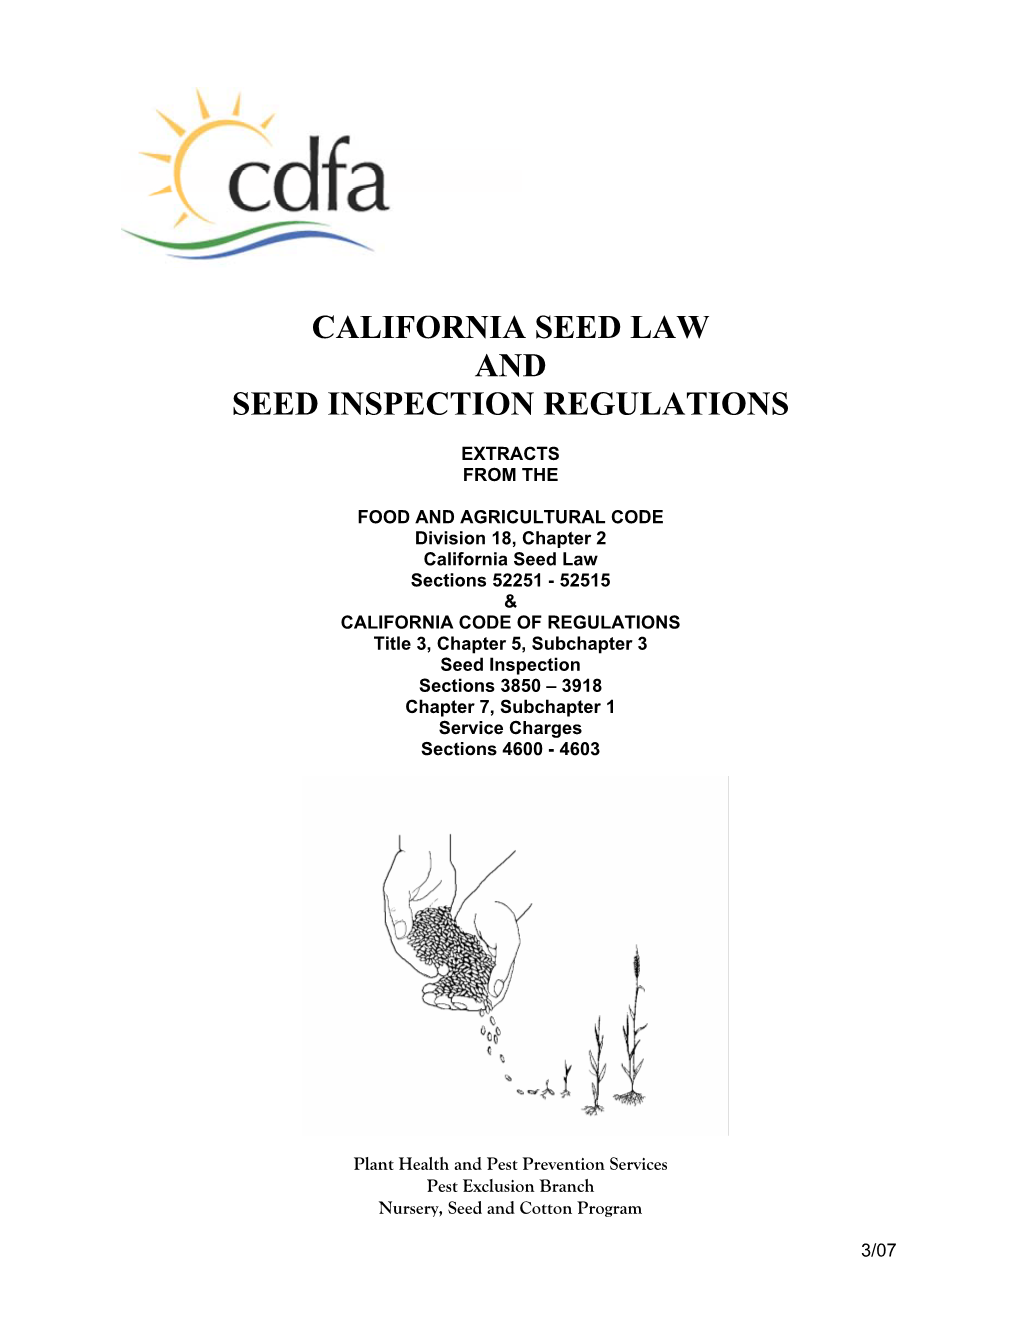 California Seed Law and Seed Inspection Regulations